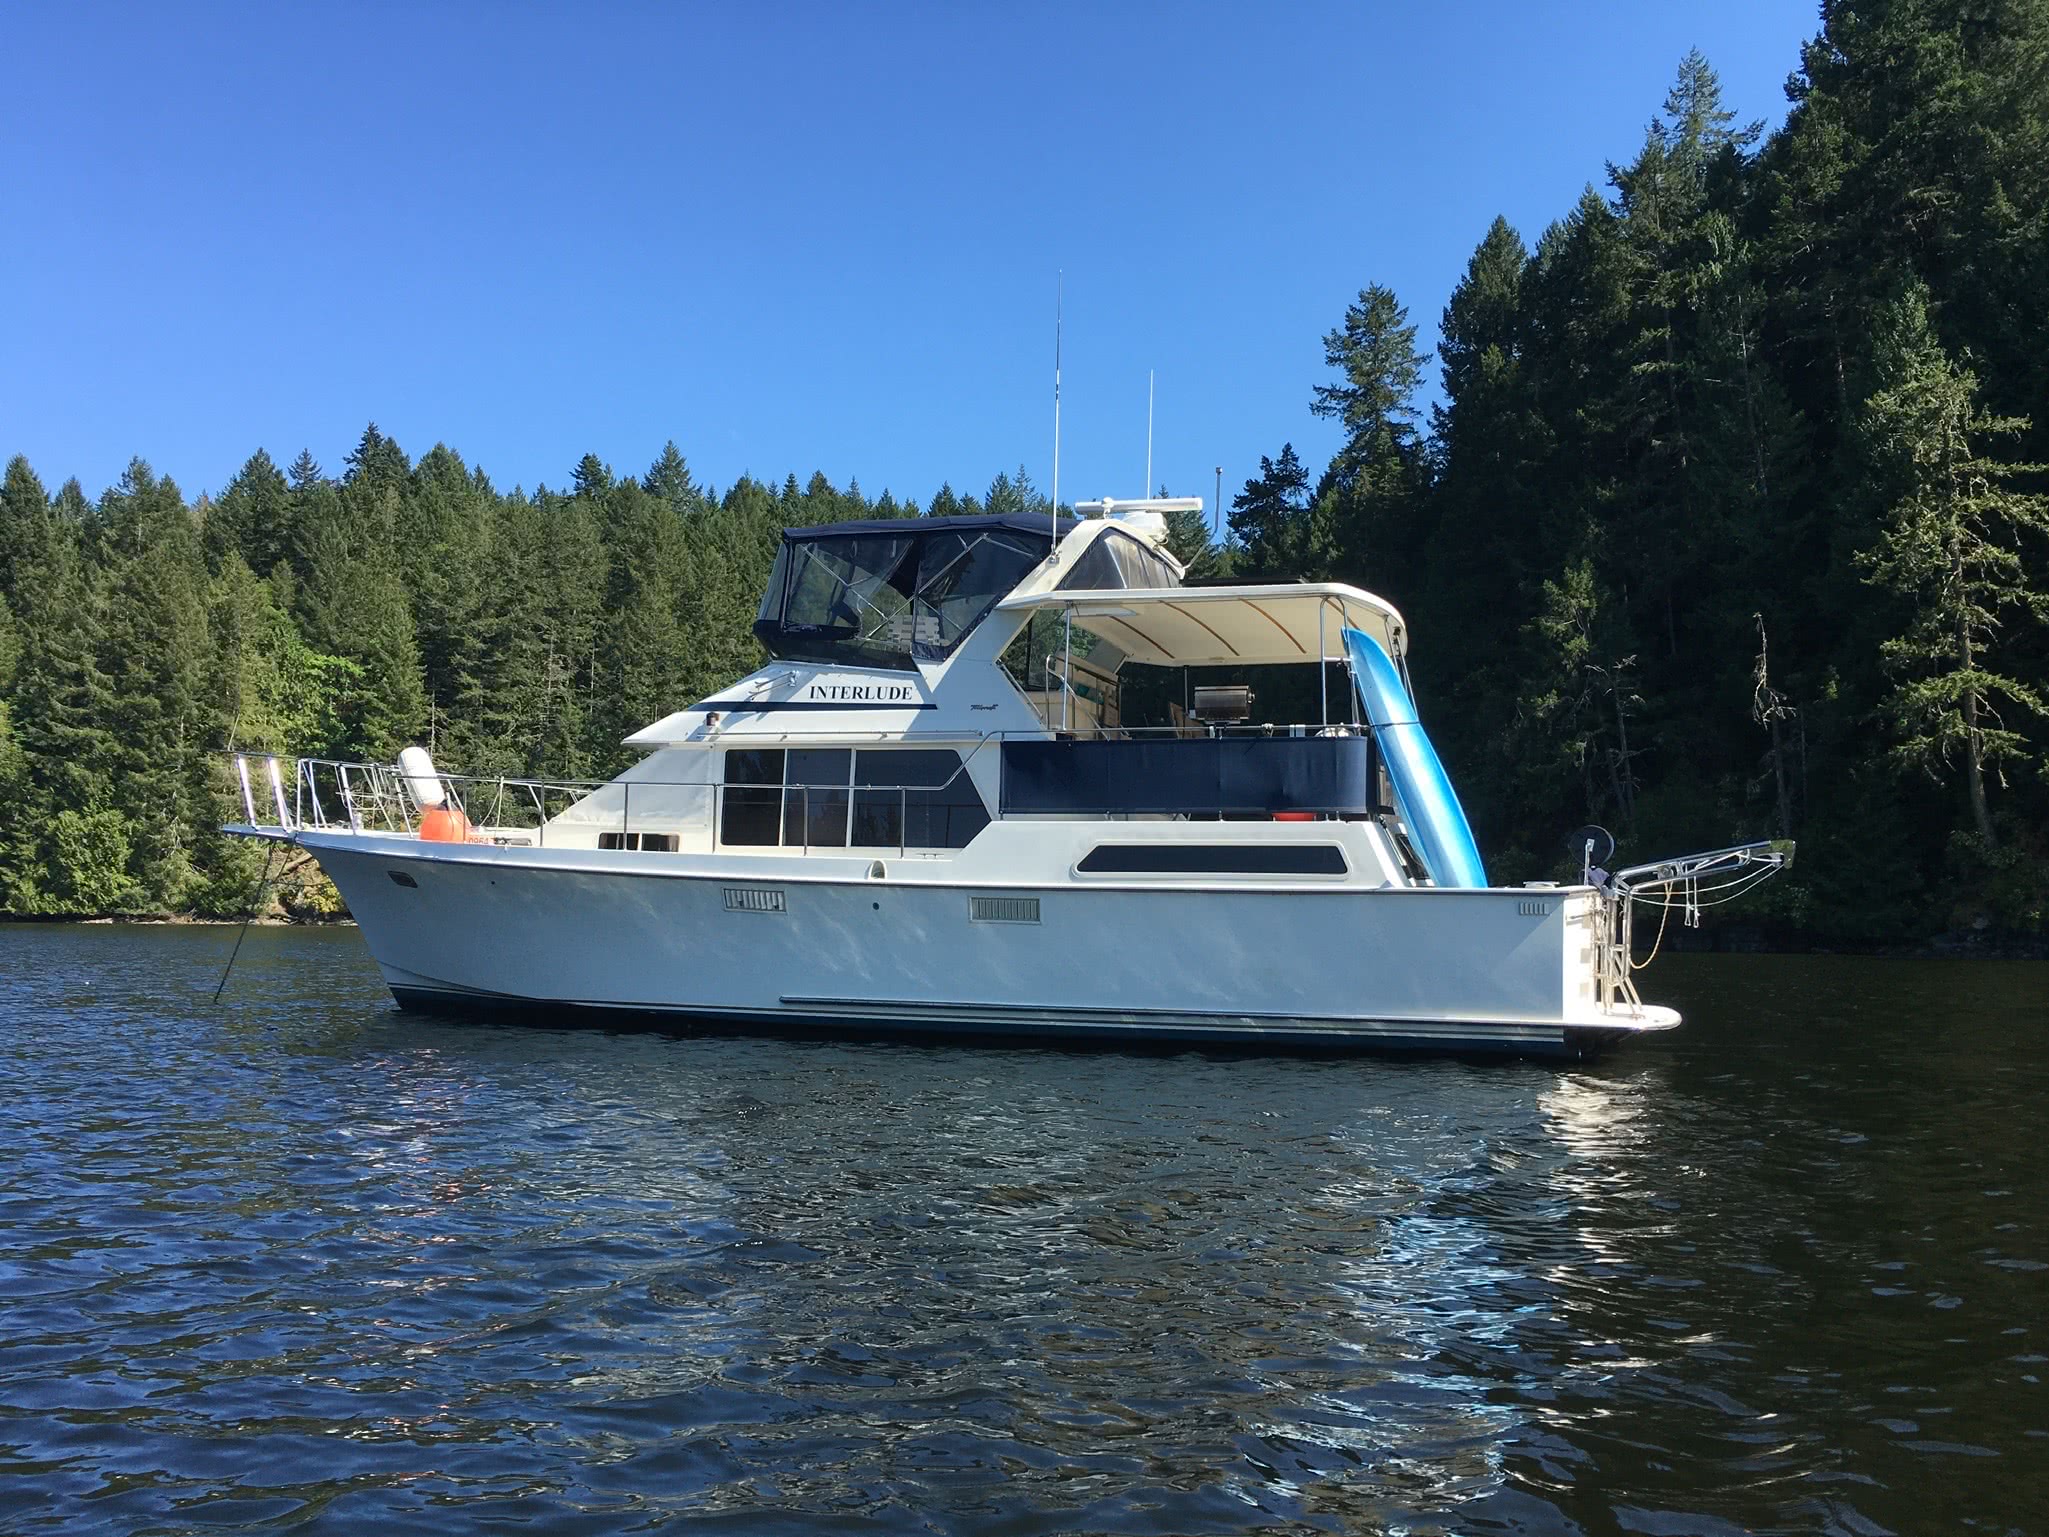 yacht sales vancouver island